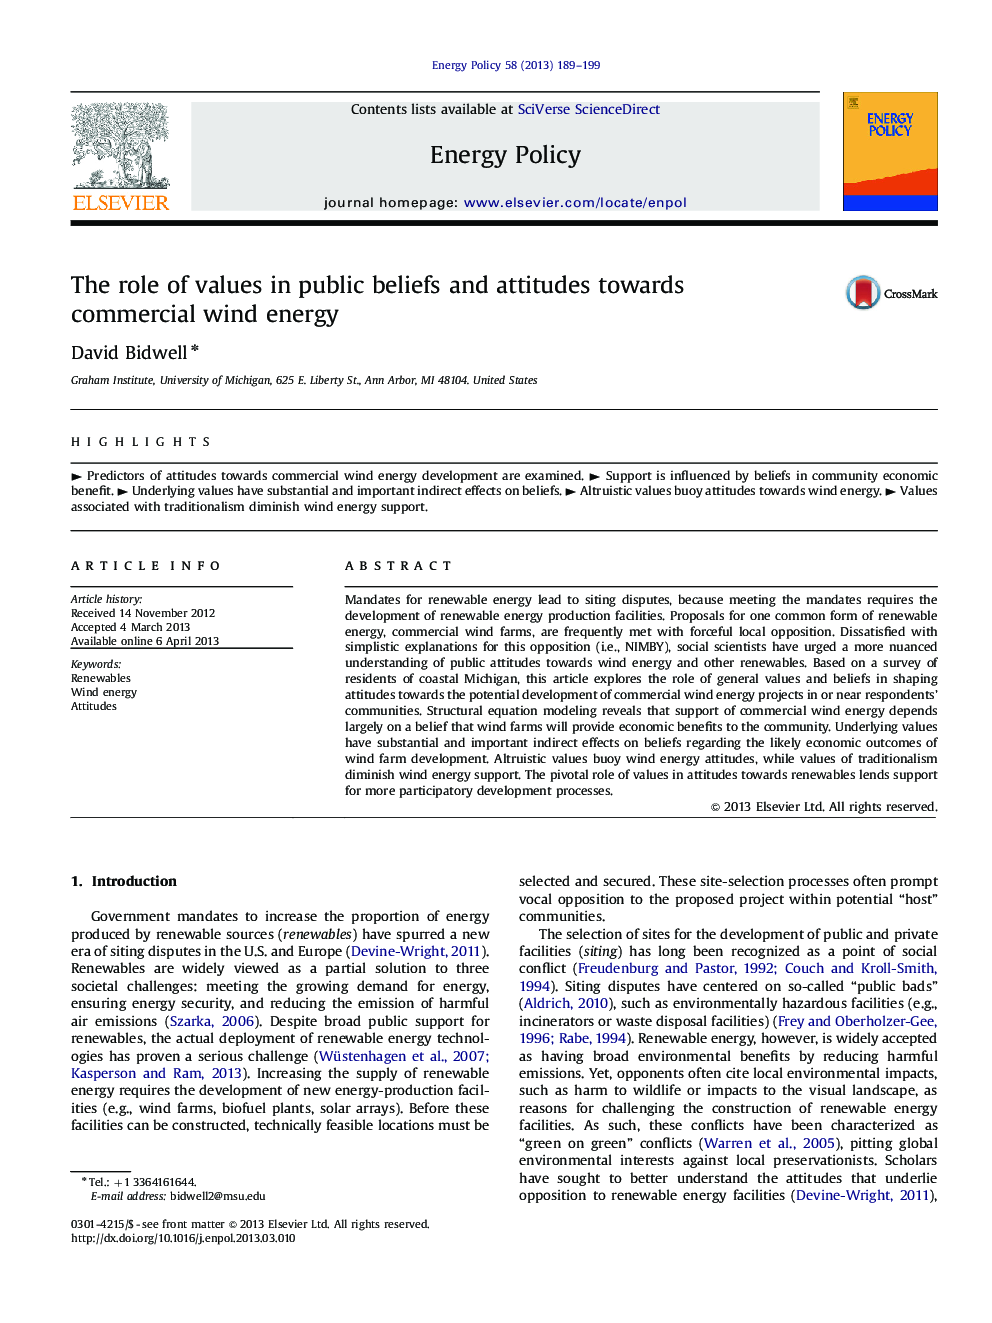 The role of values in public beliefs and attitudes towards commercial wind energy